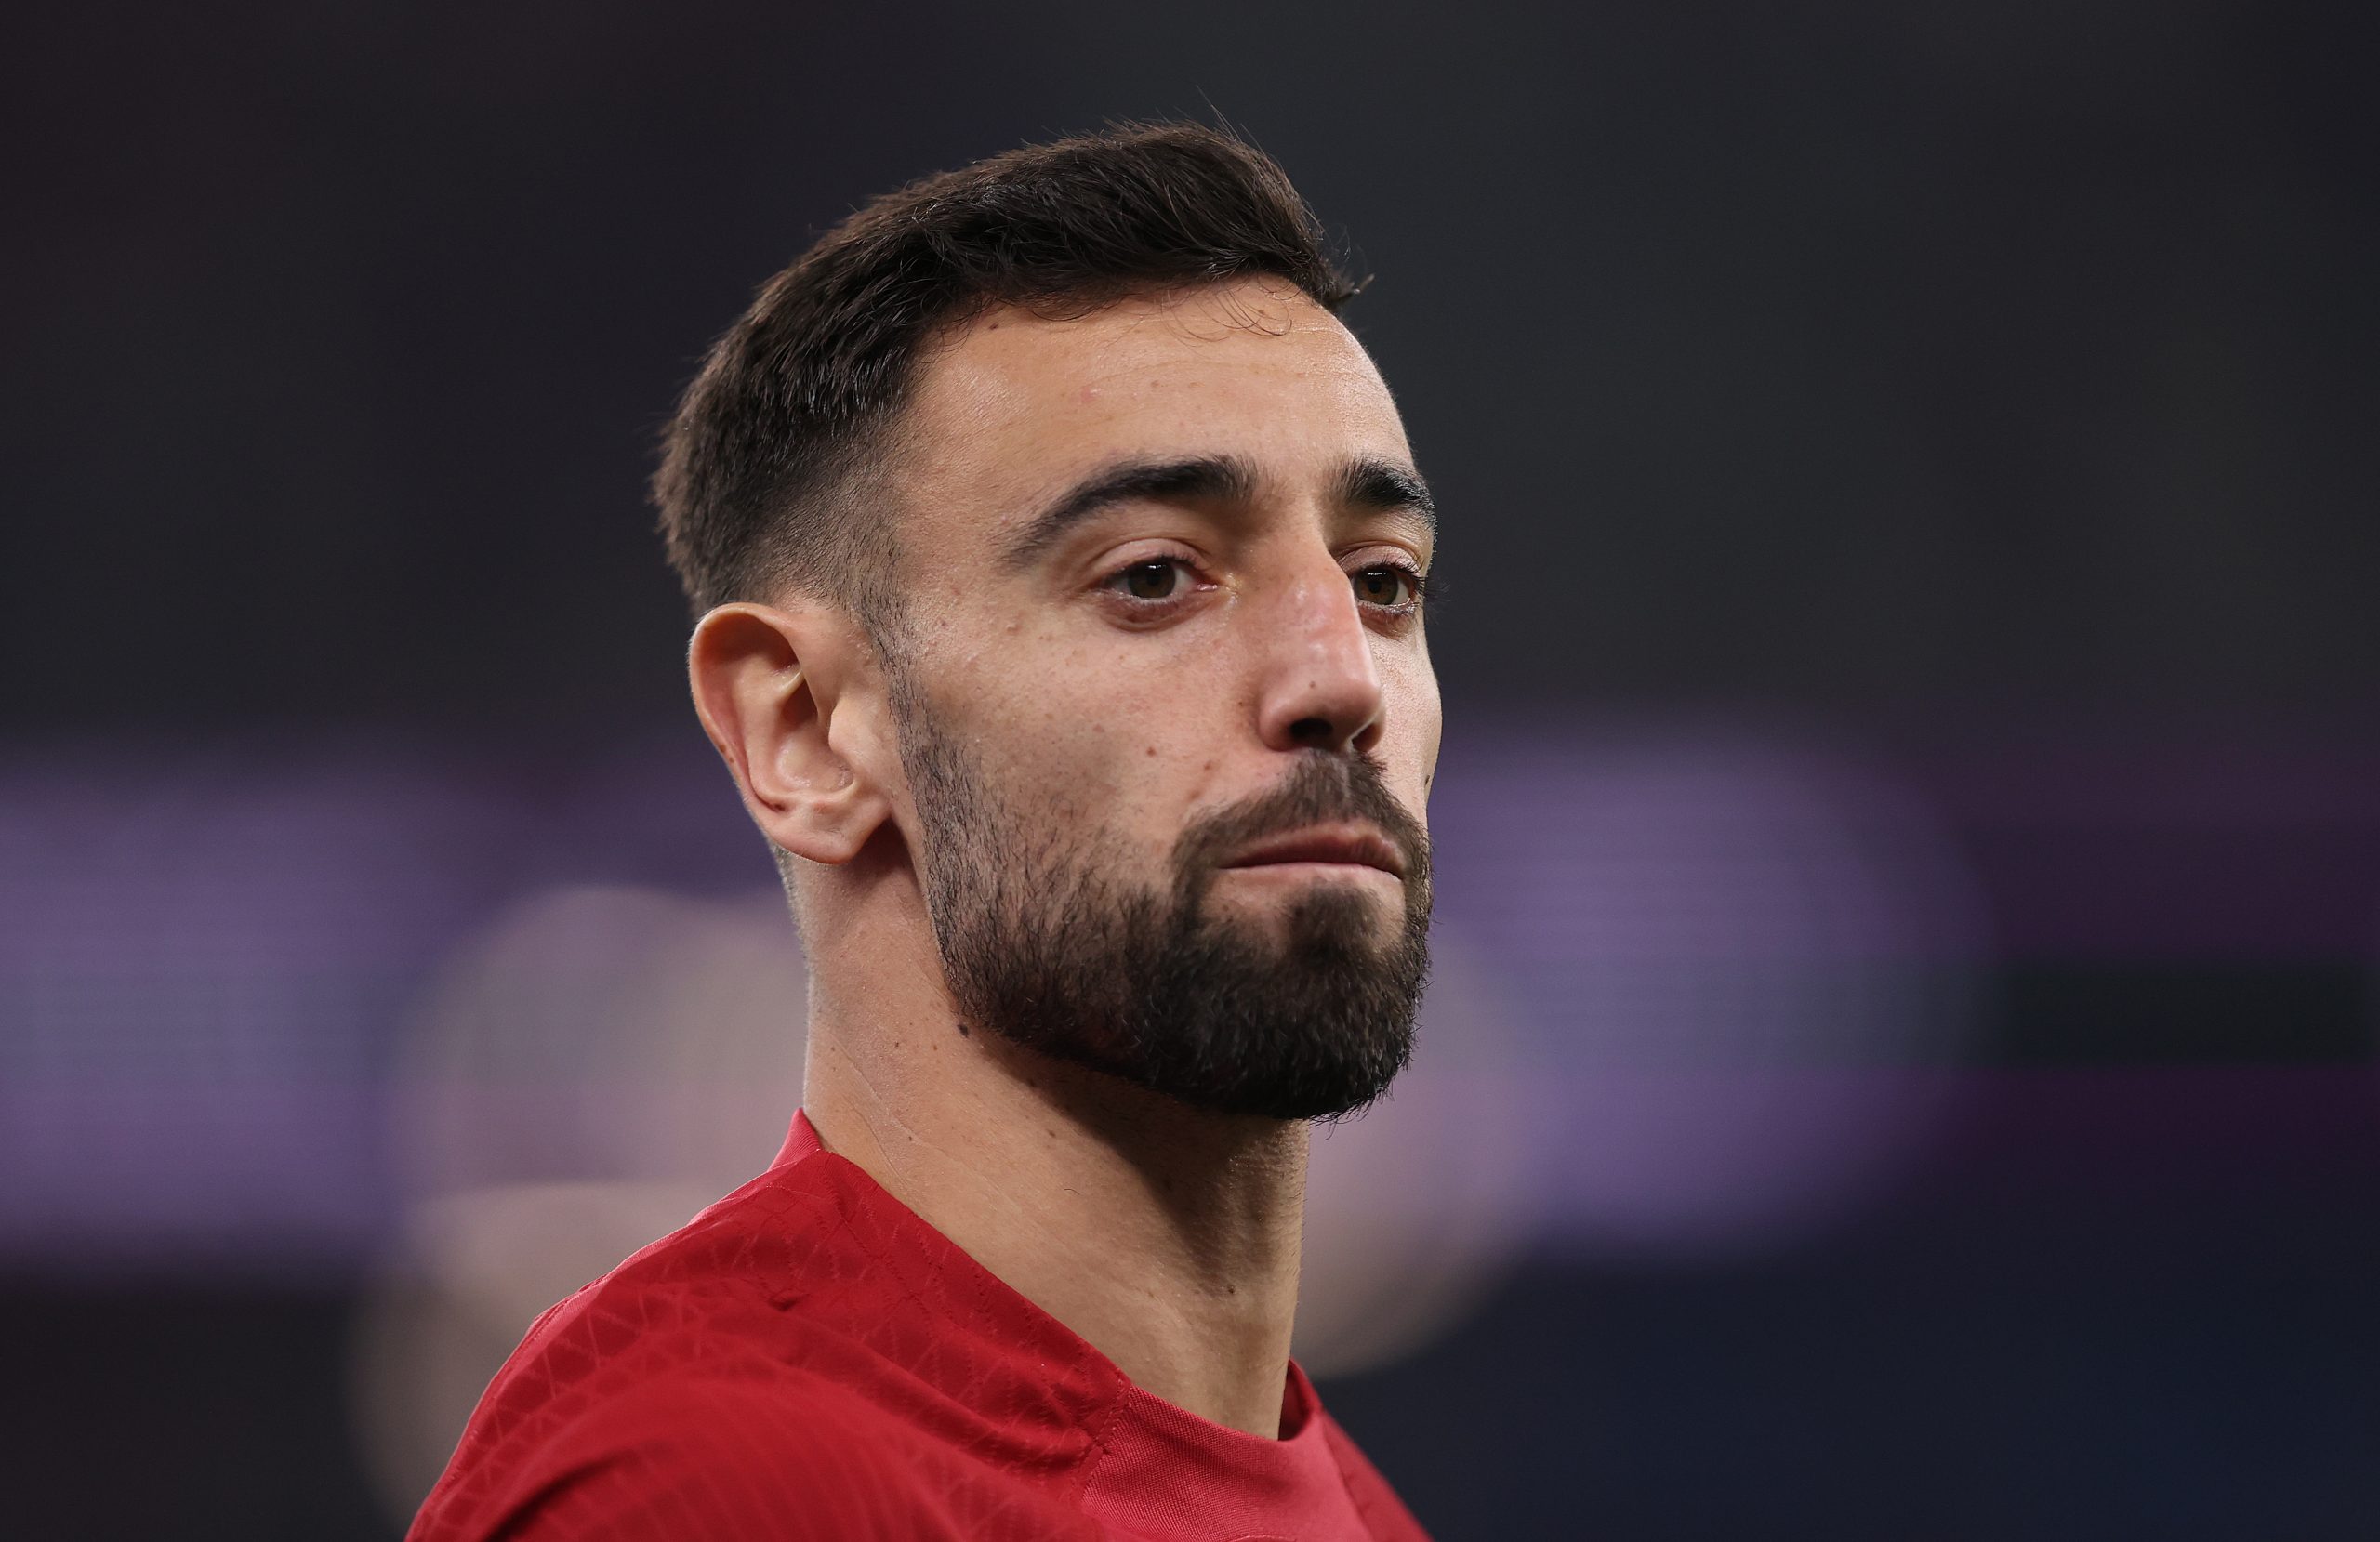 Bruno Fernandes of Portugal looks on during the FIFA World Cup Qatar 2022 Group H match between Portugal and Ghana at Stadium 974 on November 24, 2022 in Doha, Qatar.